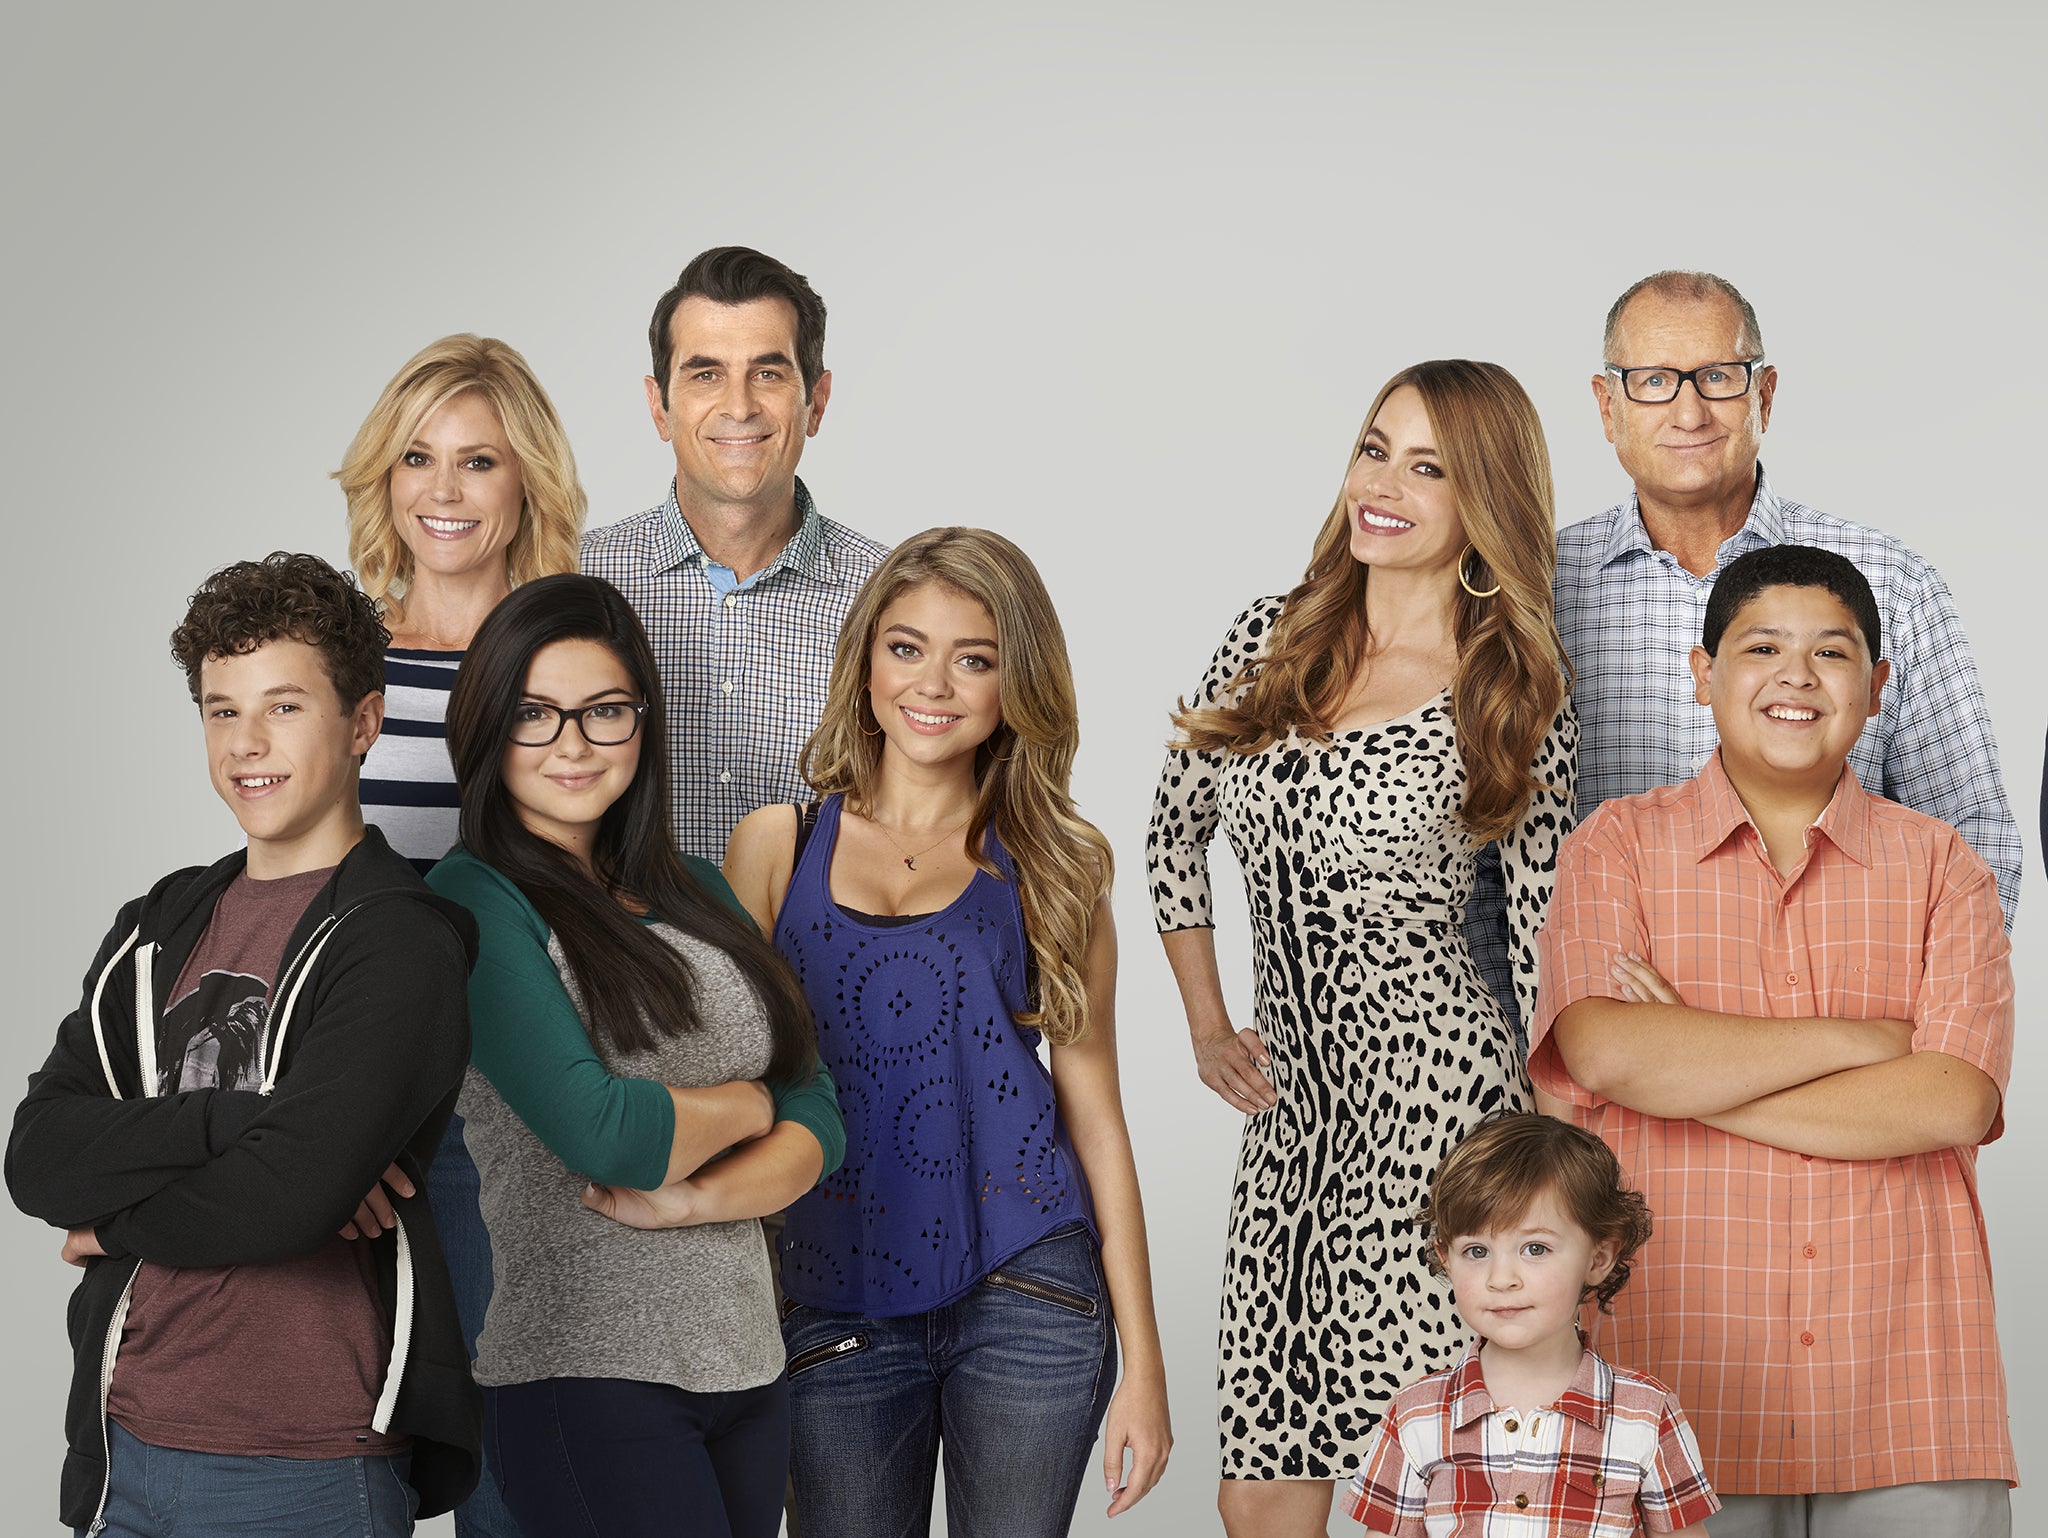 Some of the cast of Modern Family